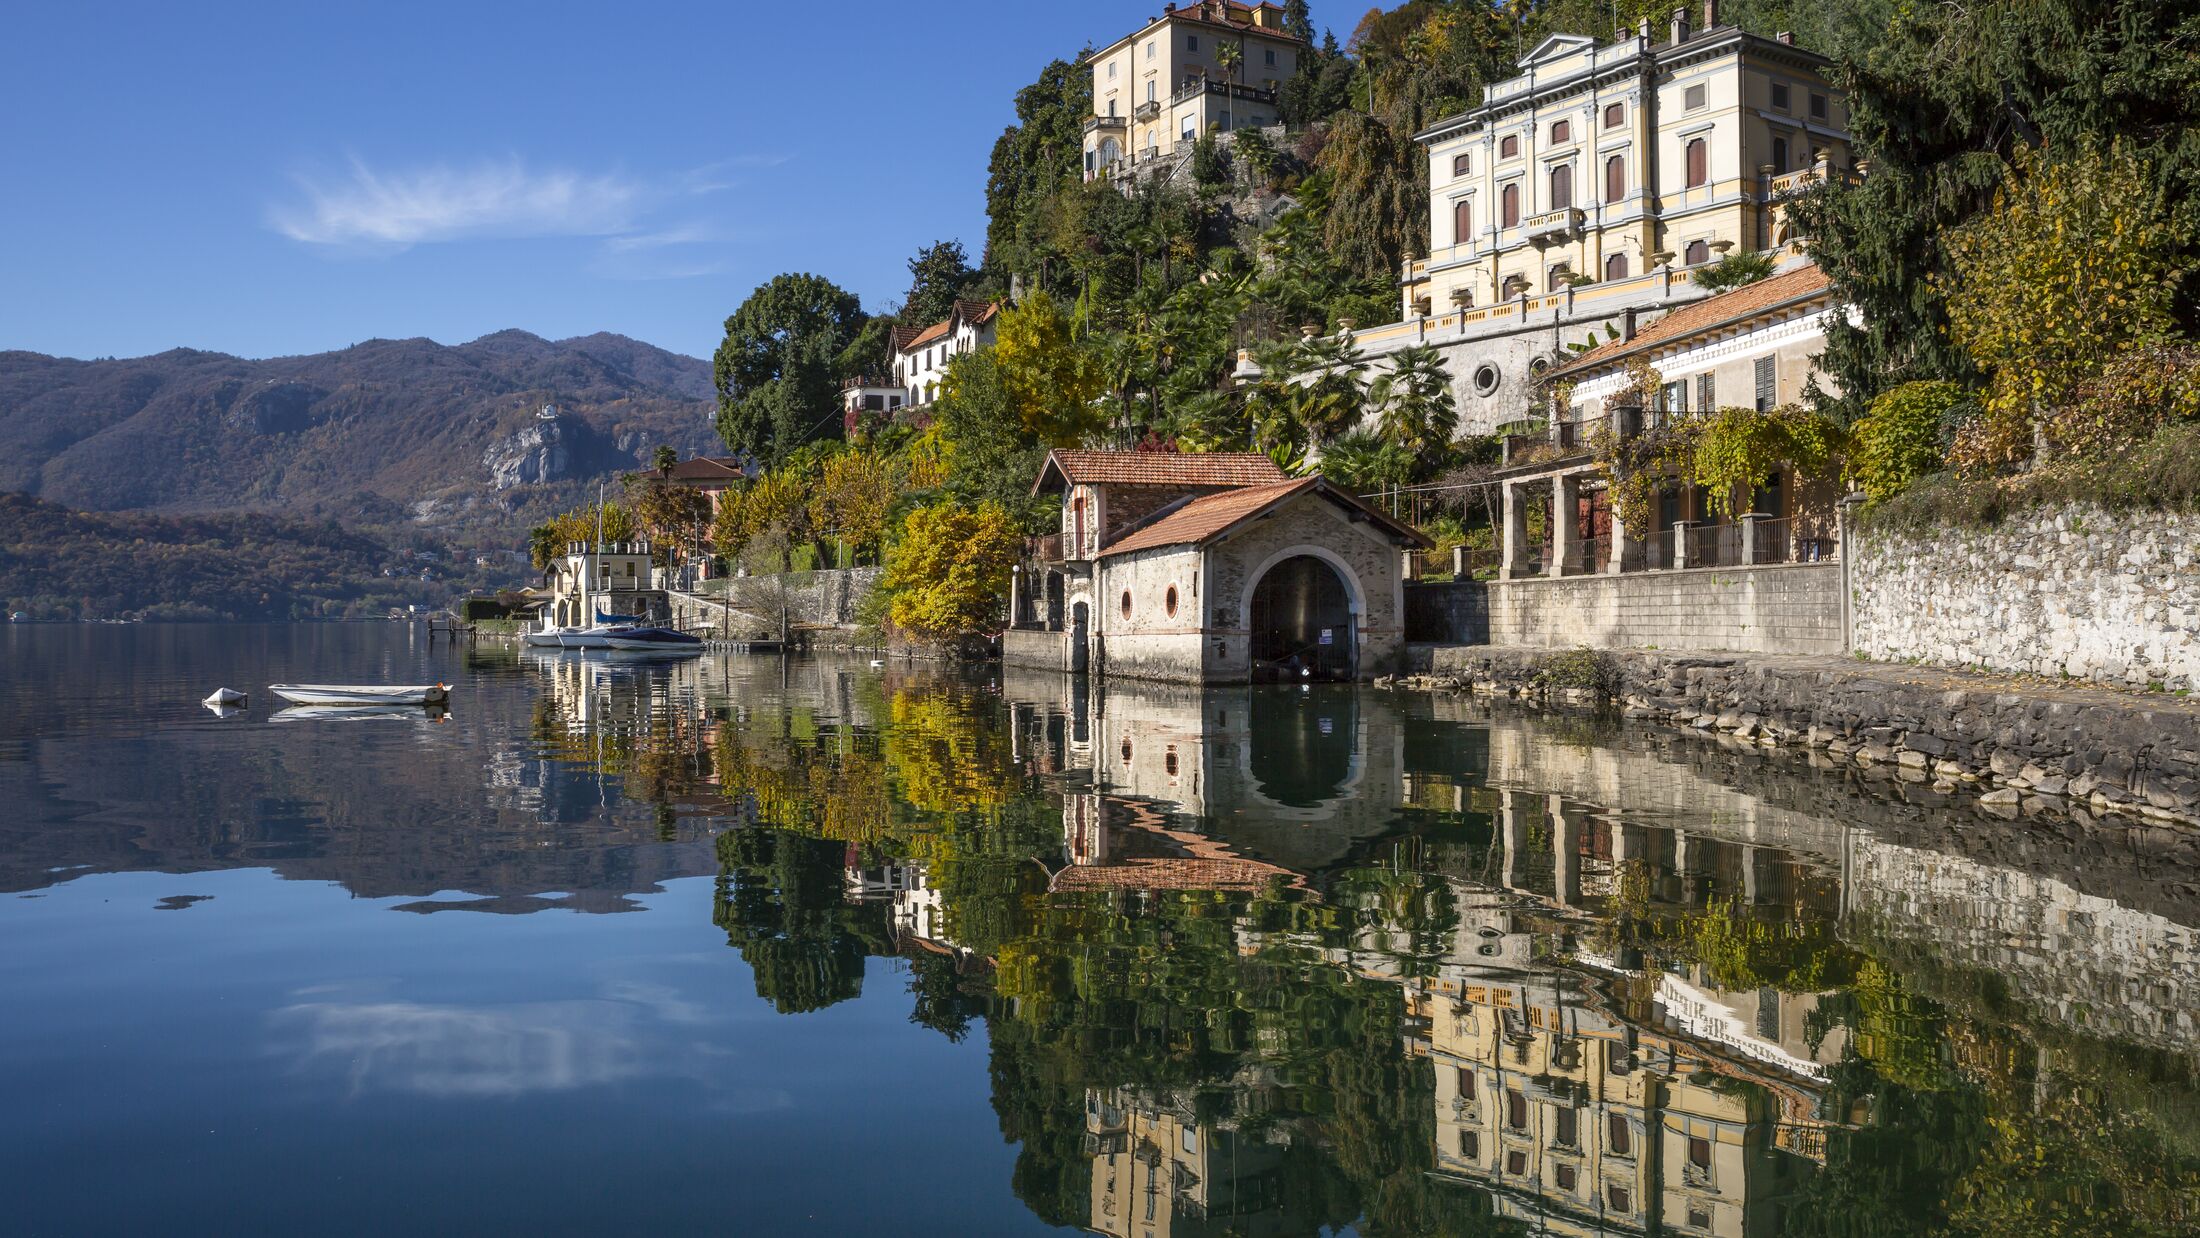 Reflections on the Lake Orta (Italy)